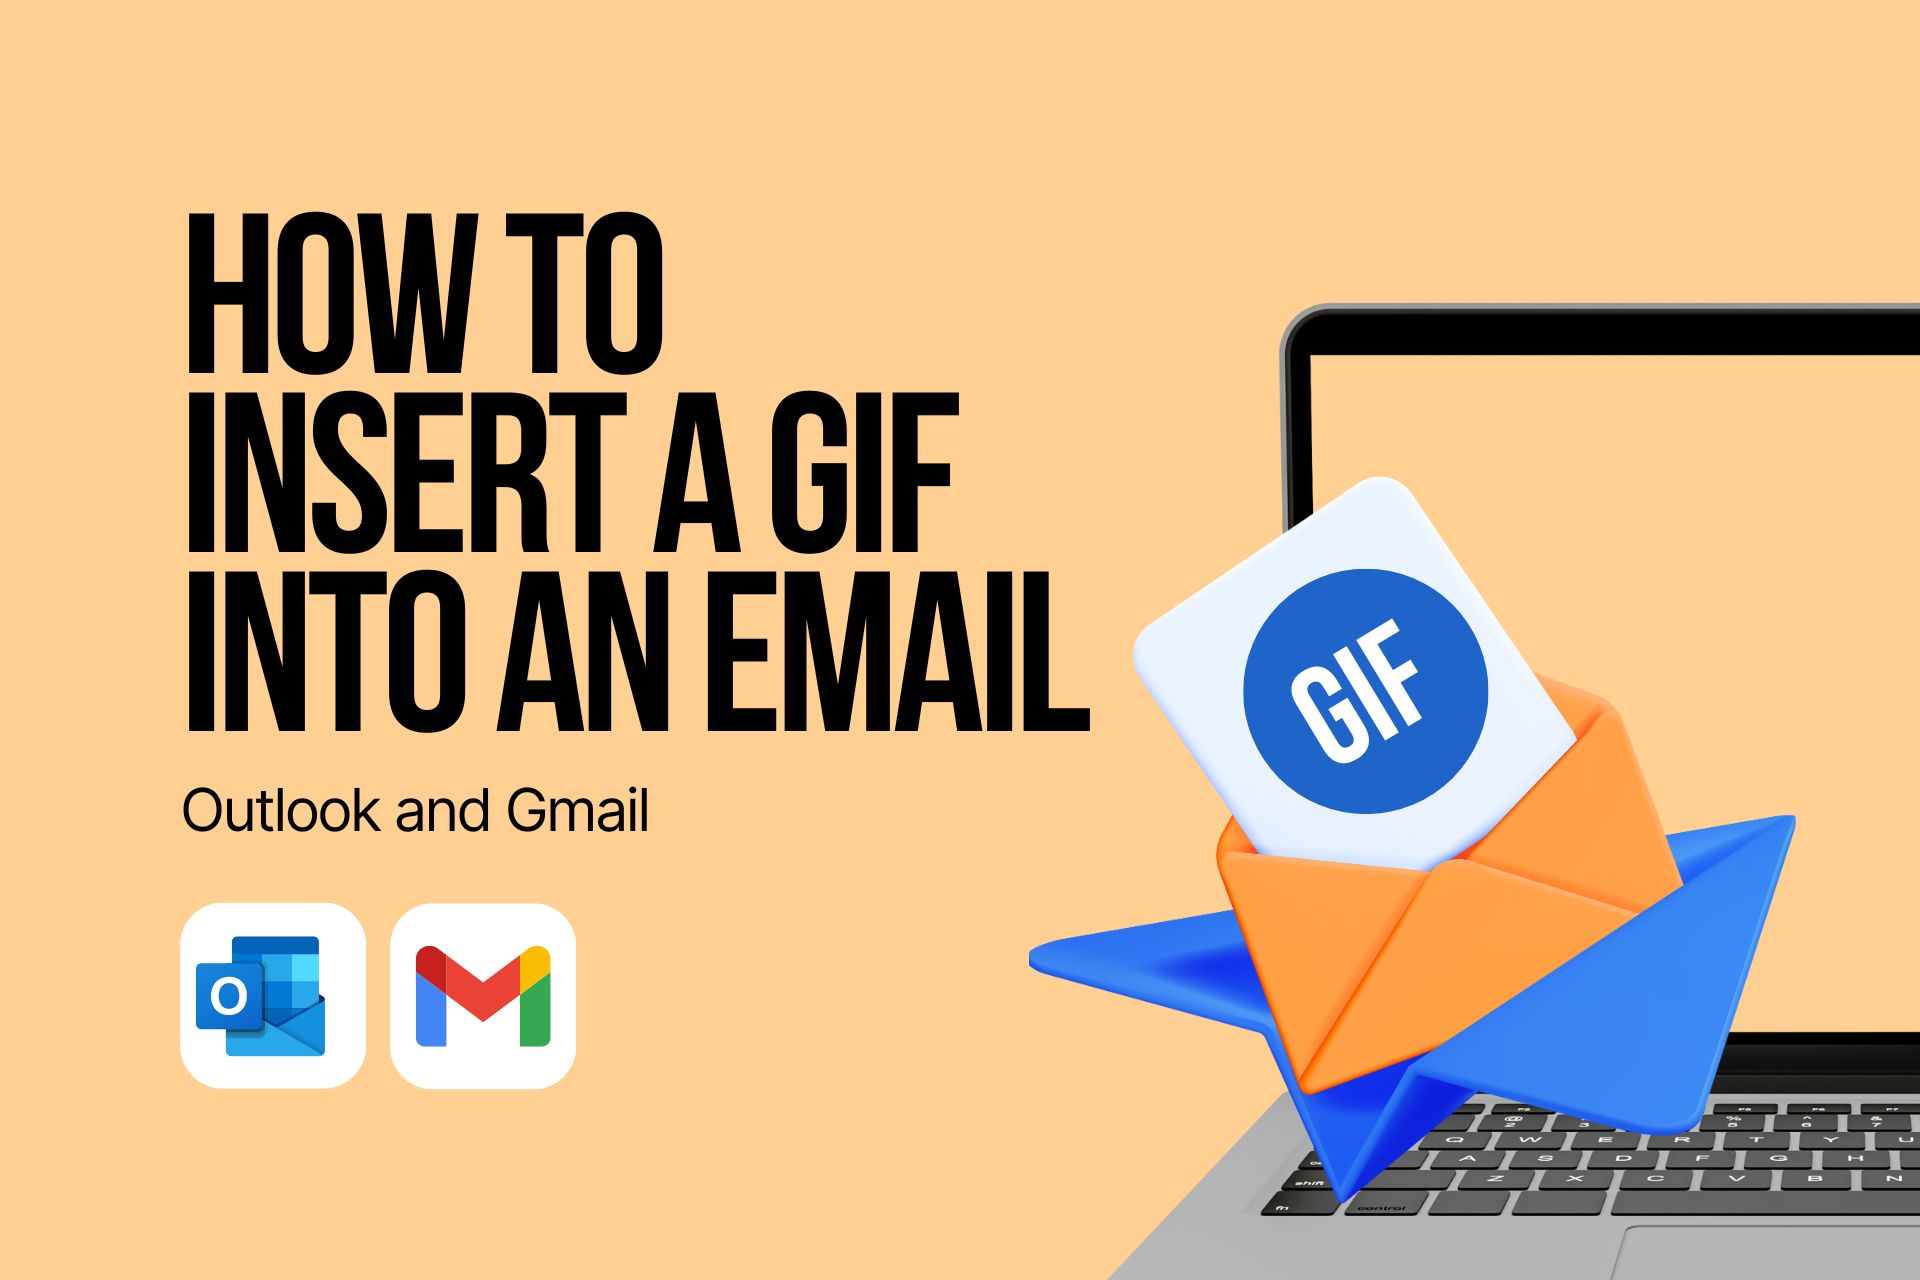 How to Insert a GIF into an Email: Outlook and Gmail